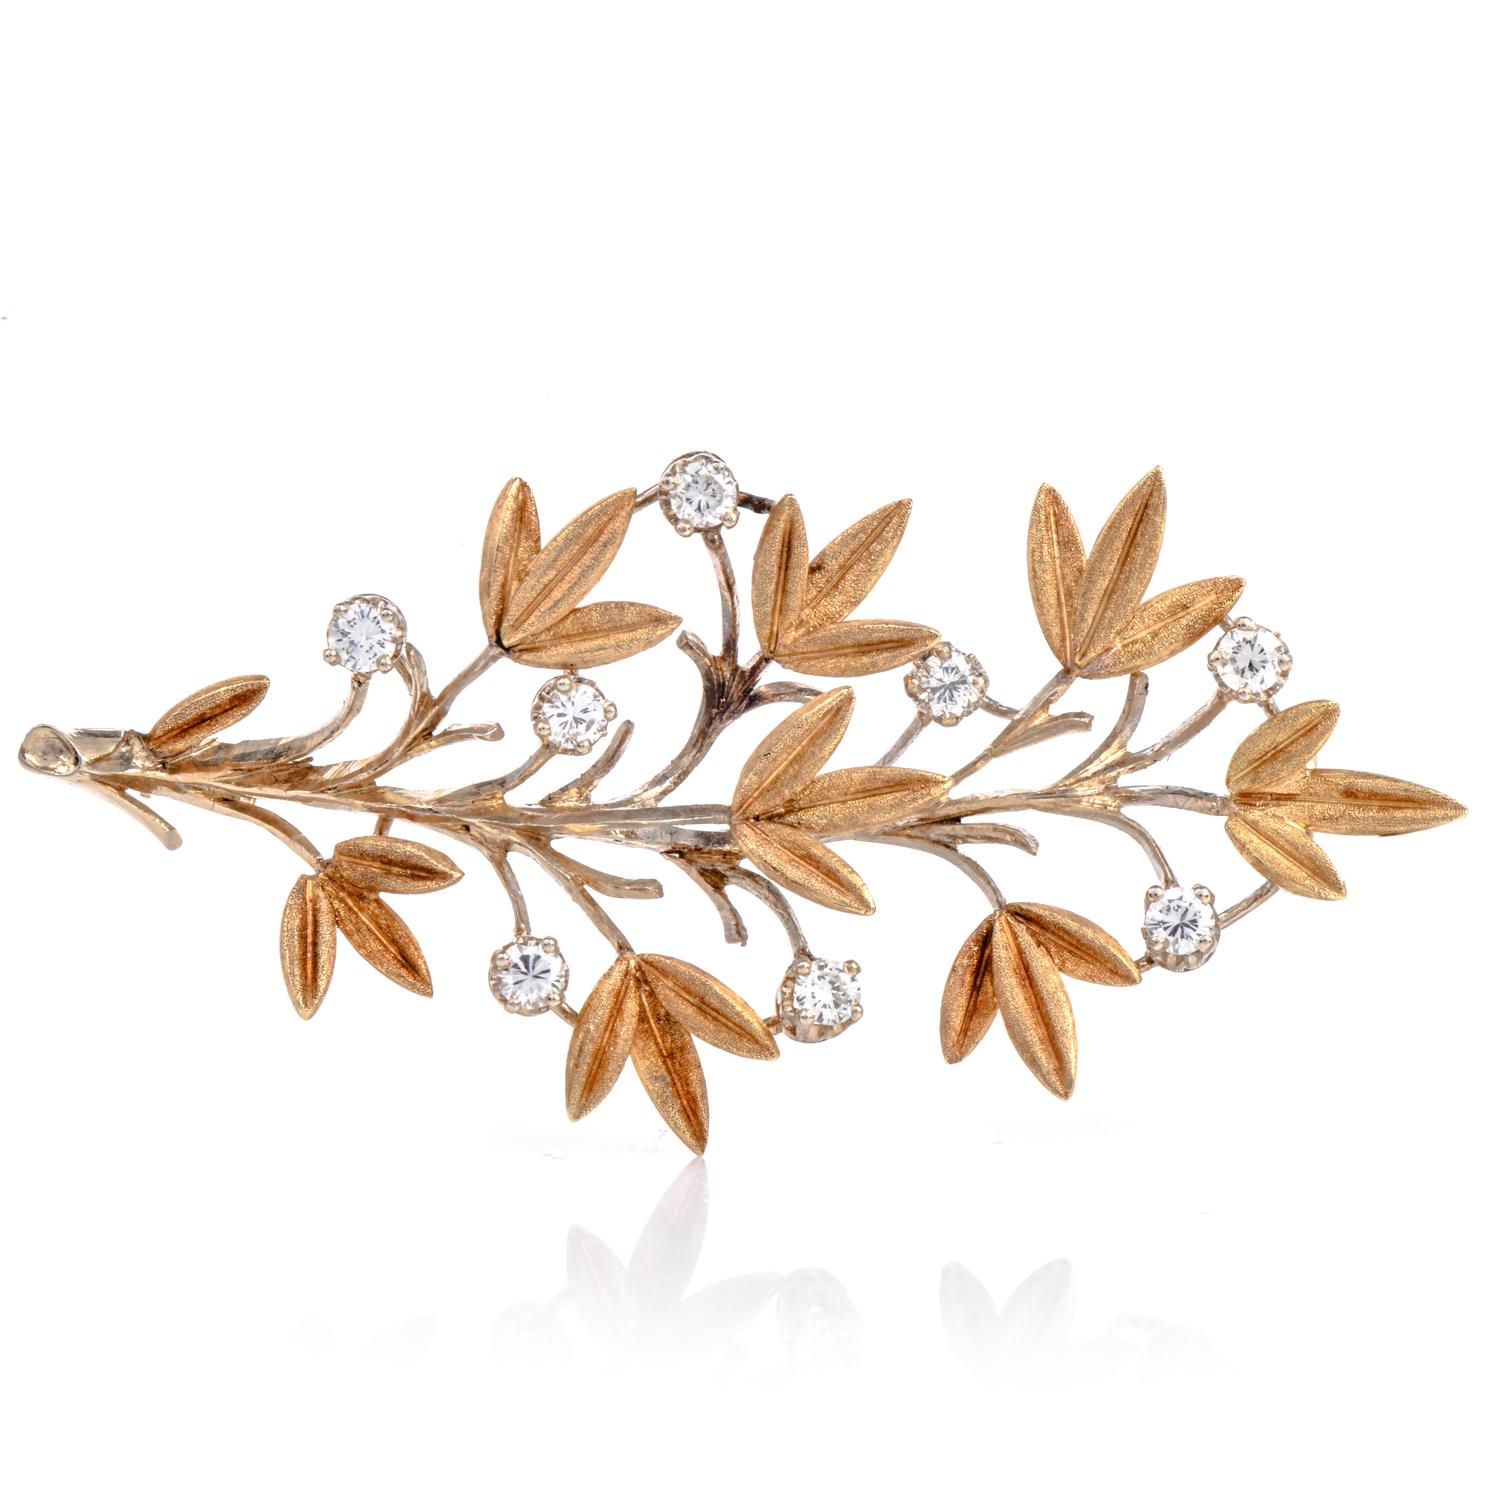 This vintage 1960s Buccellati flower pin brooch spray pin is crafted in solid 18K Yellow Gold. It is composed of 8 round-cut, prong-set, Diamonds weighing approximately 0.75 carats (G-H color and VS1 clarity) prong-set

measures approximately 2.25